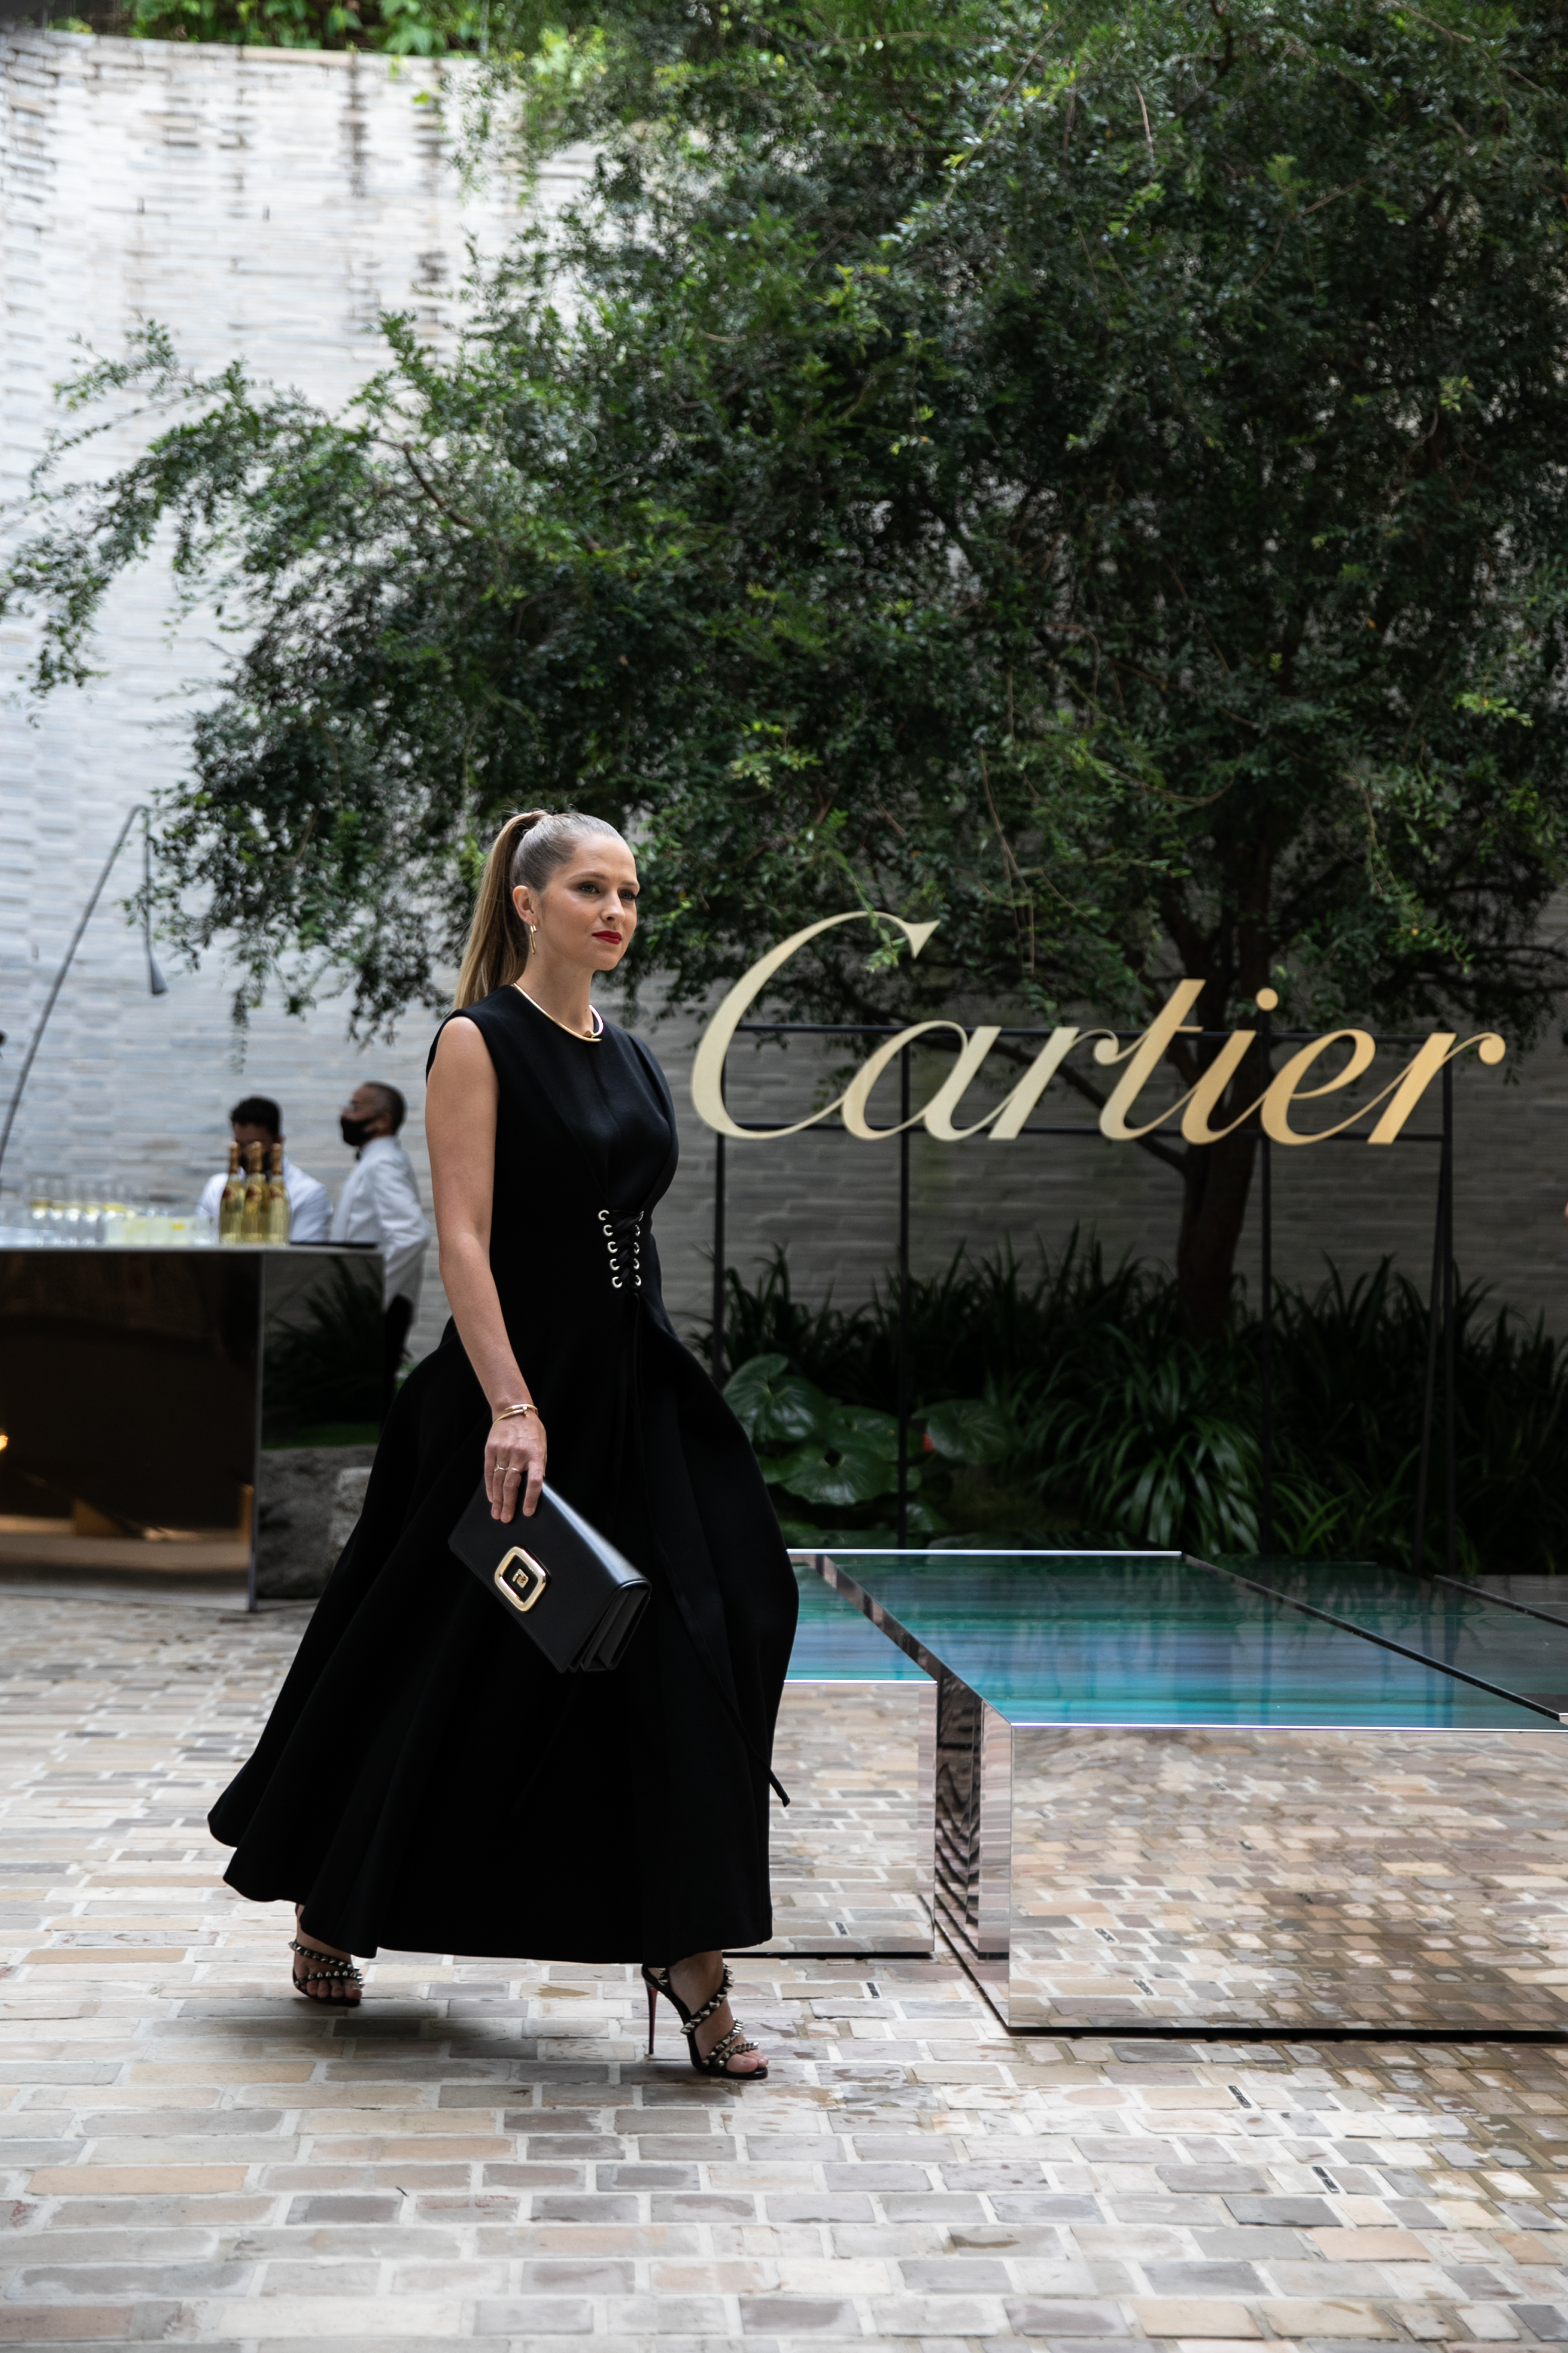 Cartier's Largest Travelling High Jewellery Collection Comes To Sydney